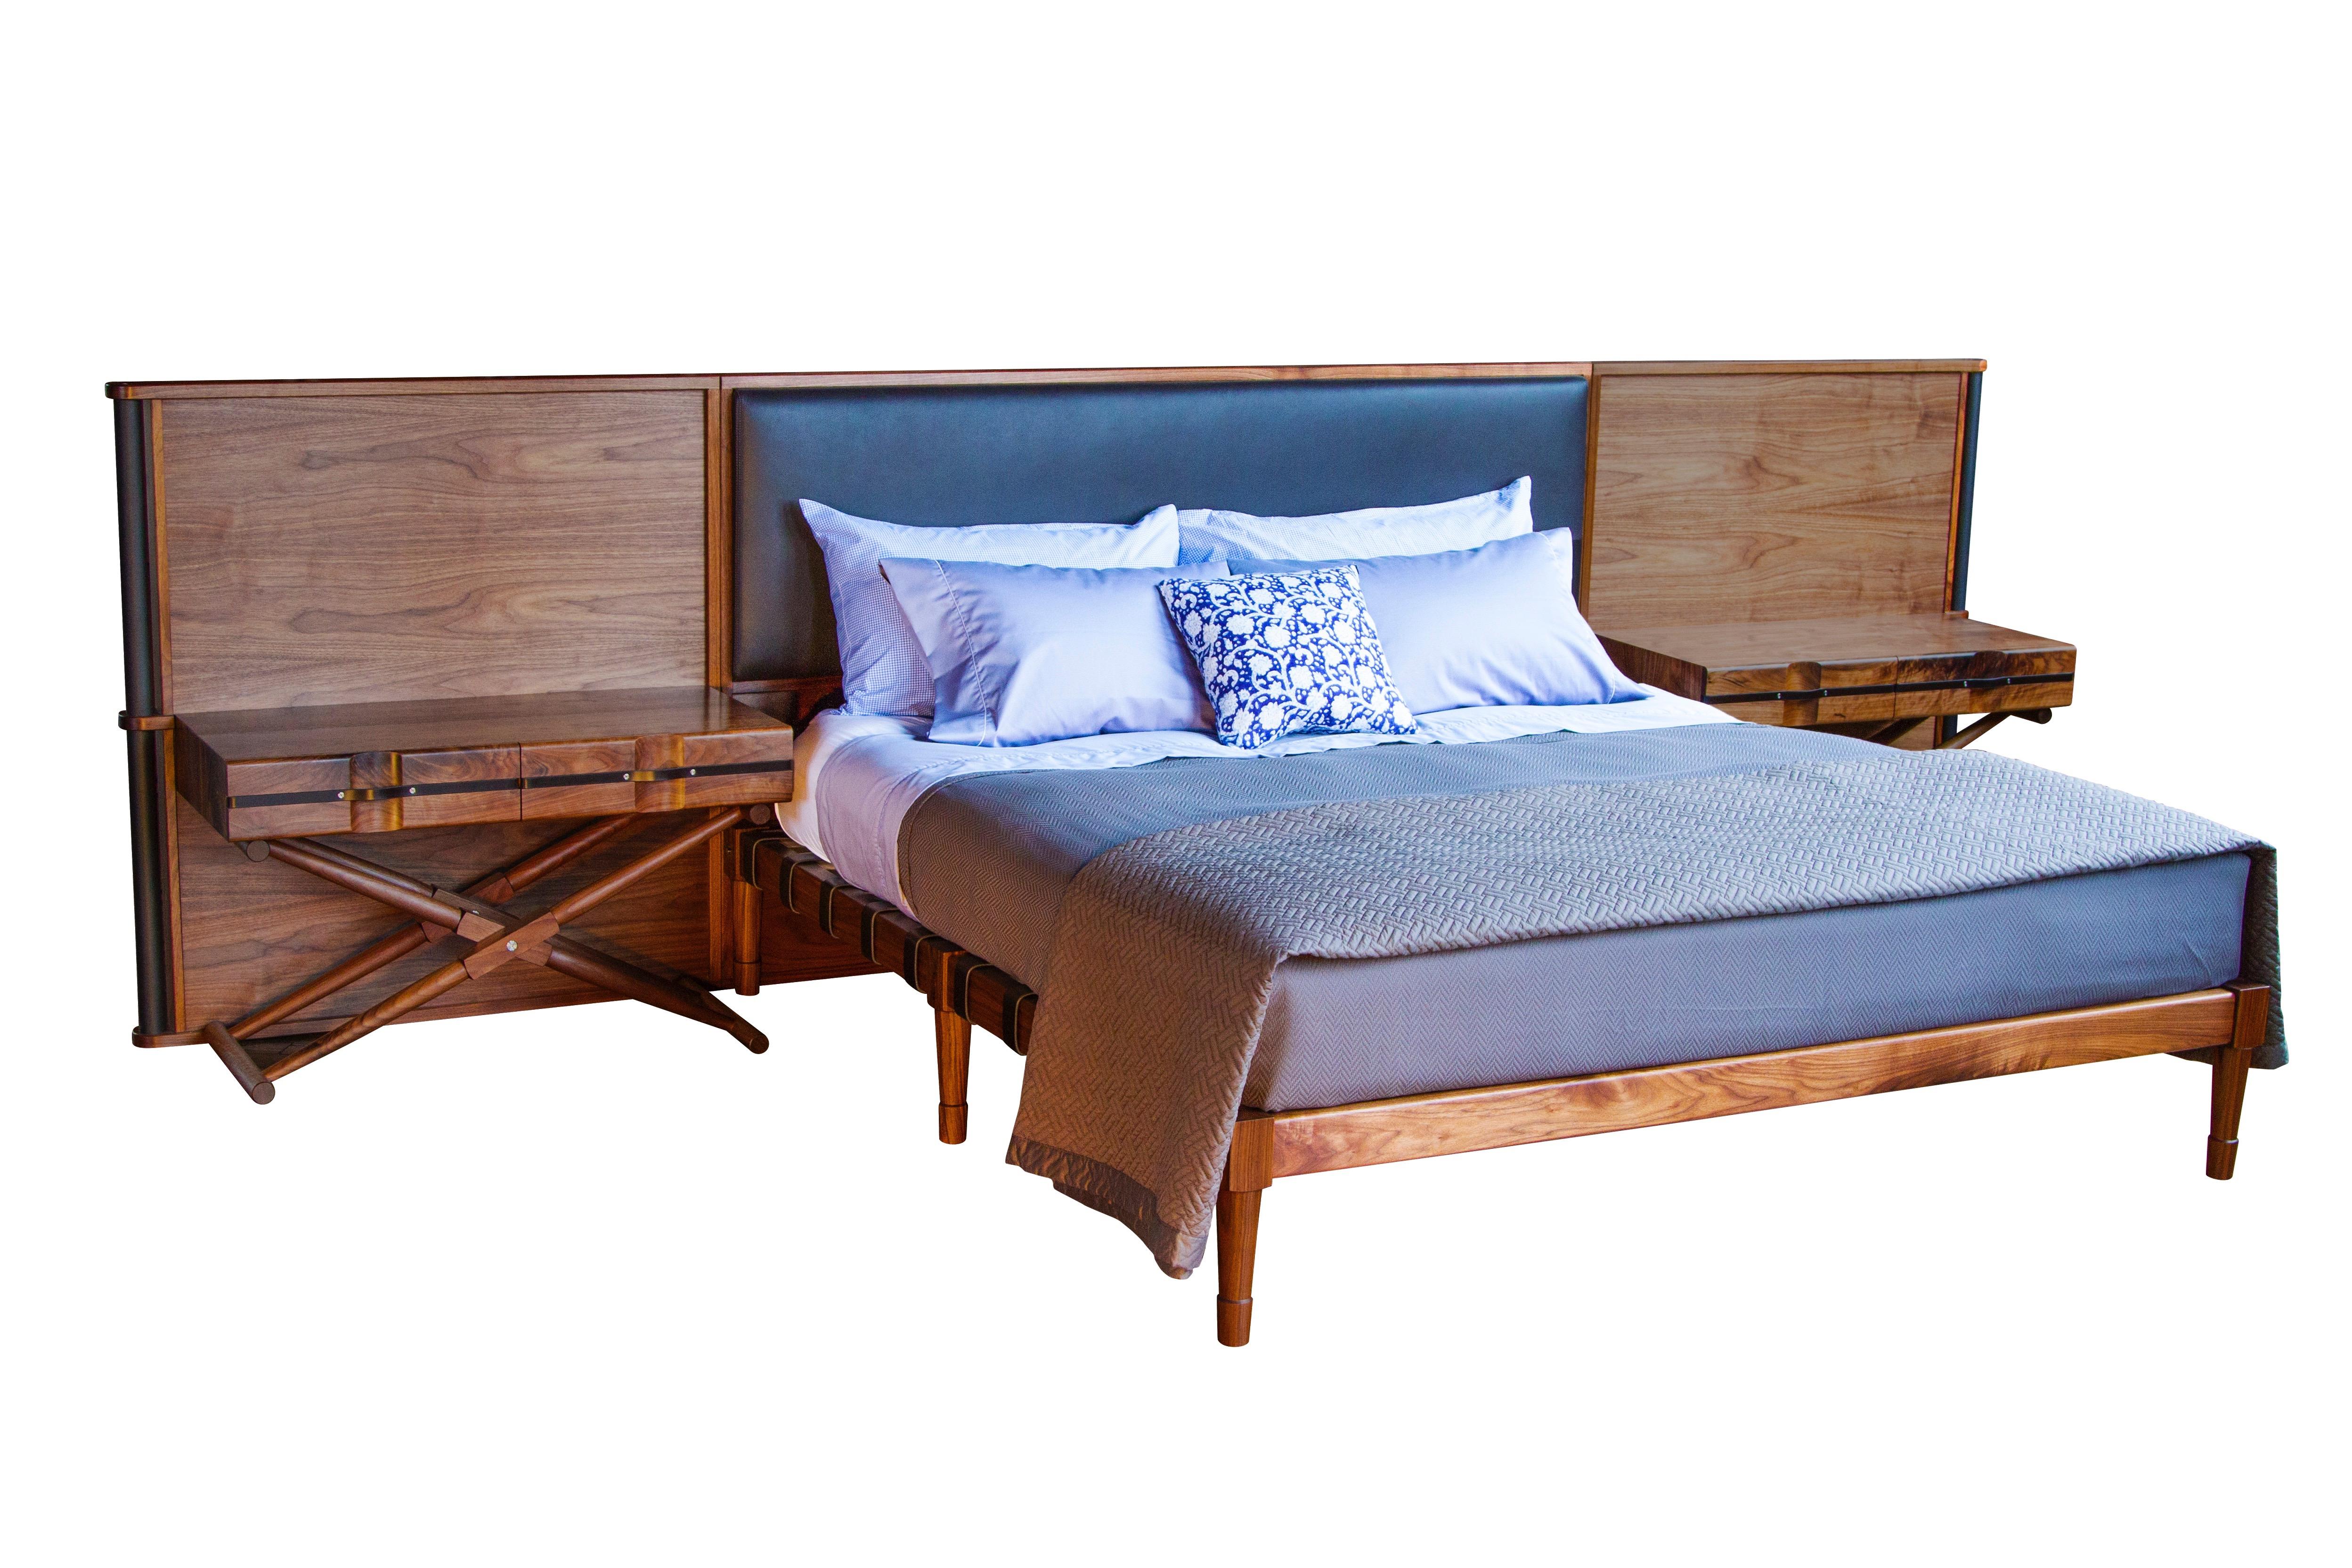 A King sized Jasper bed in oiled walnut with a Jasper headboard upholstered in Moore & Giles: Deer Run / Bitter Chocolate, leather wrapped handles and two matching Matthiessen side tables with double drawers.

The modern Campaign collection by